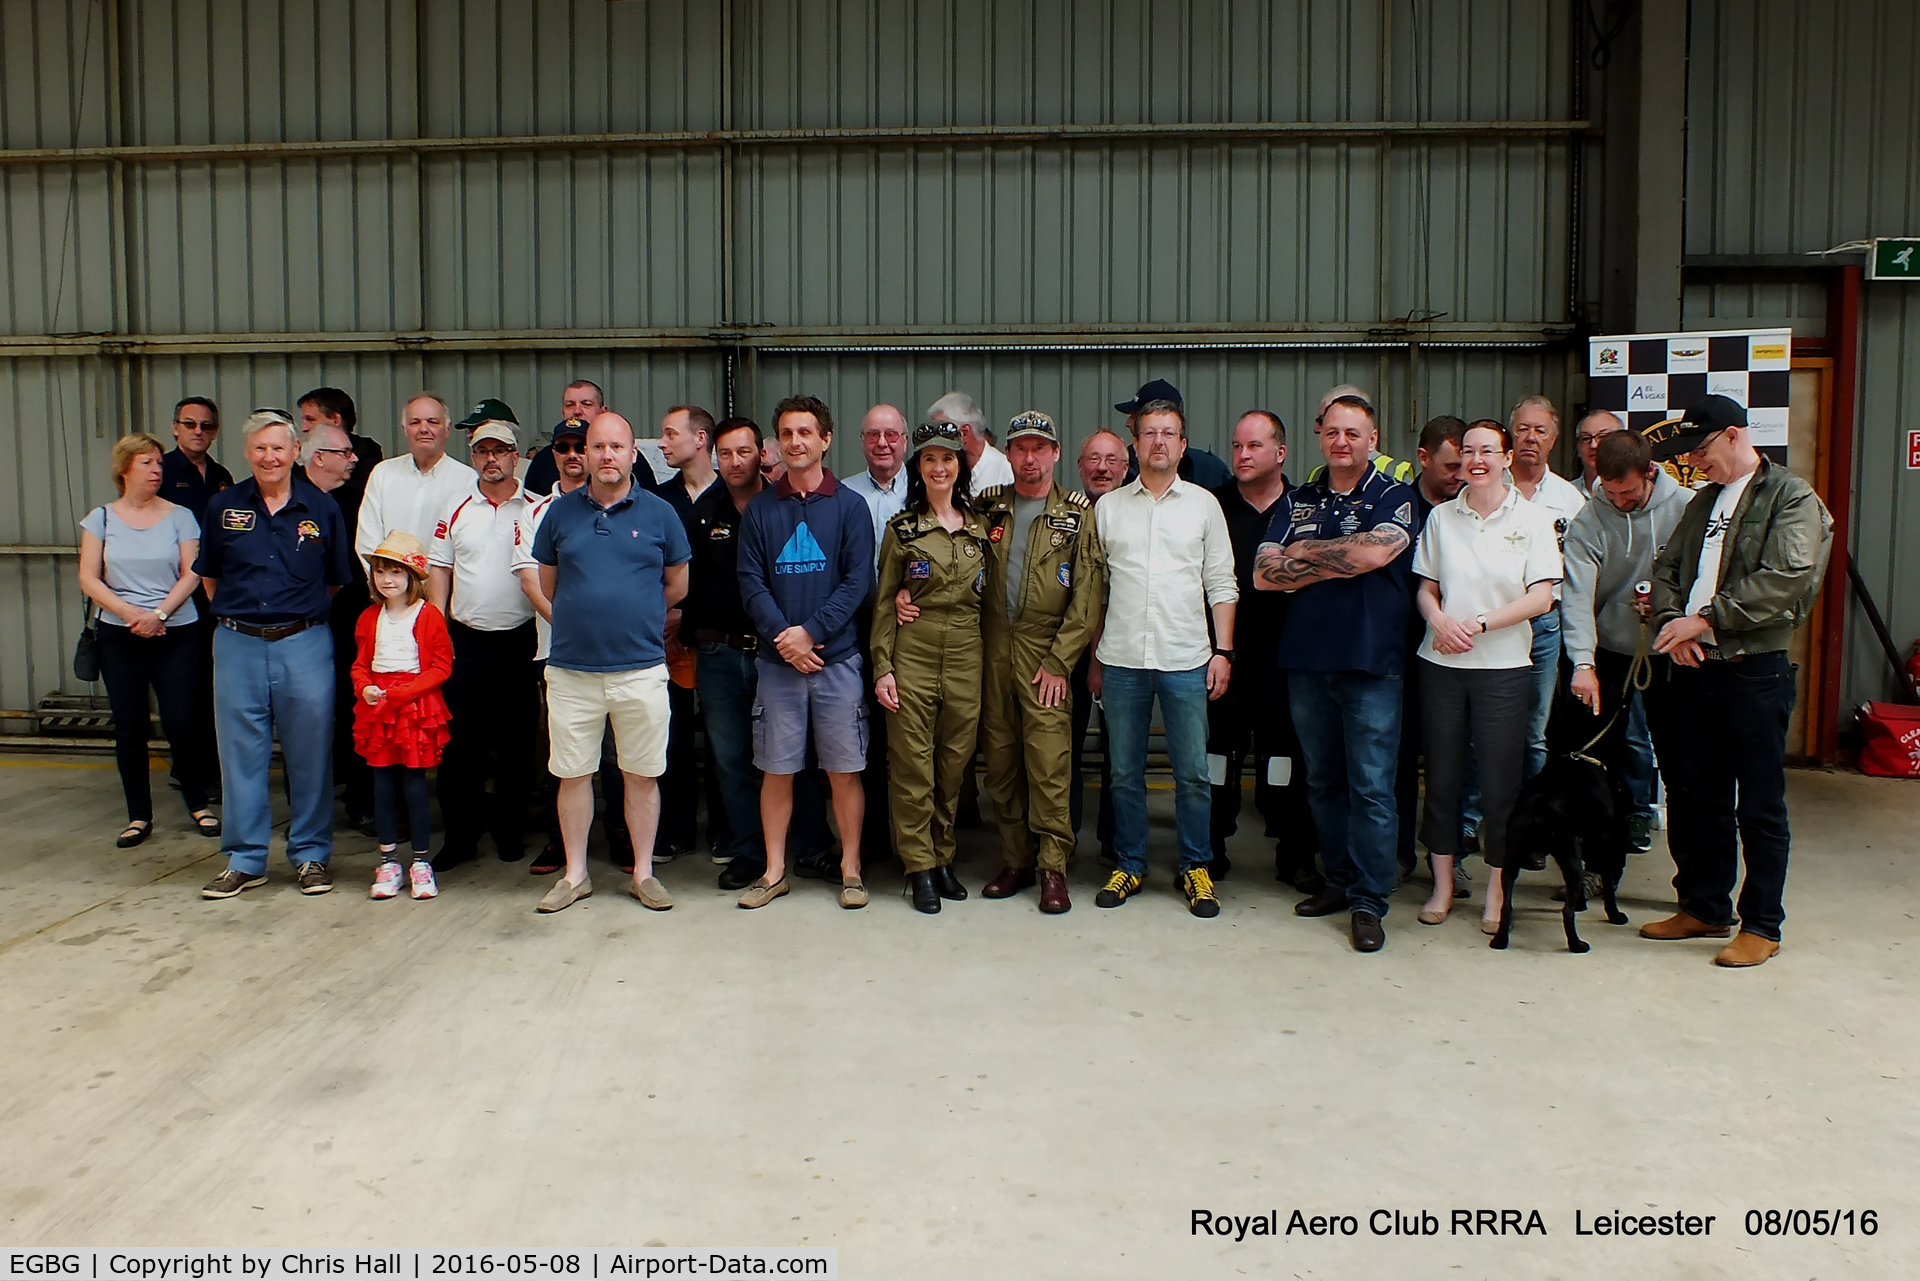 Leicester Airport, Leicester, England United Kingdom (EGBG) - competetors in the Royal Aero Club air race at Leicester